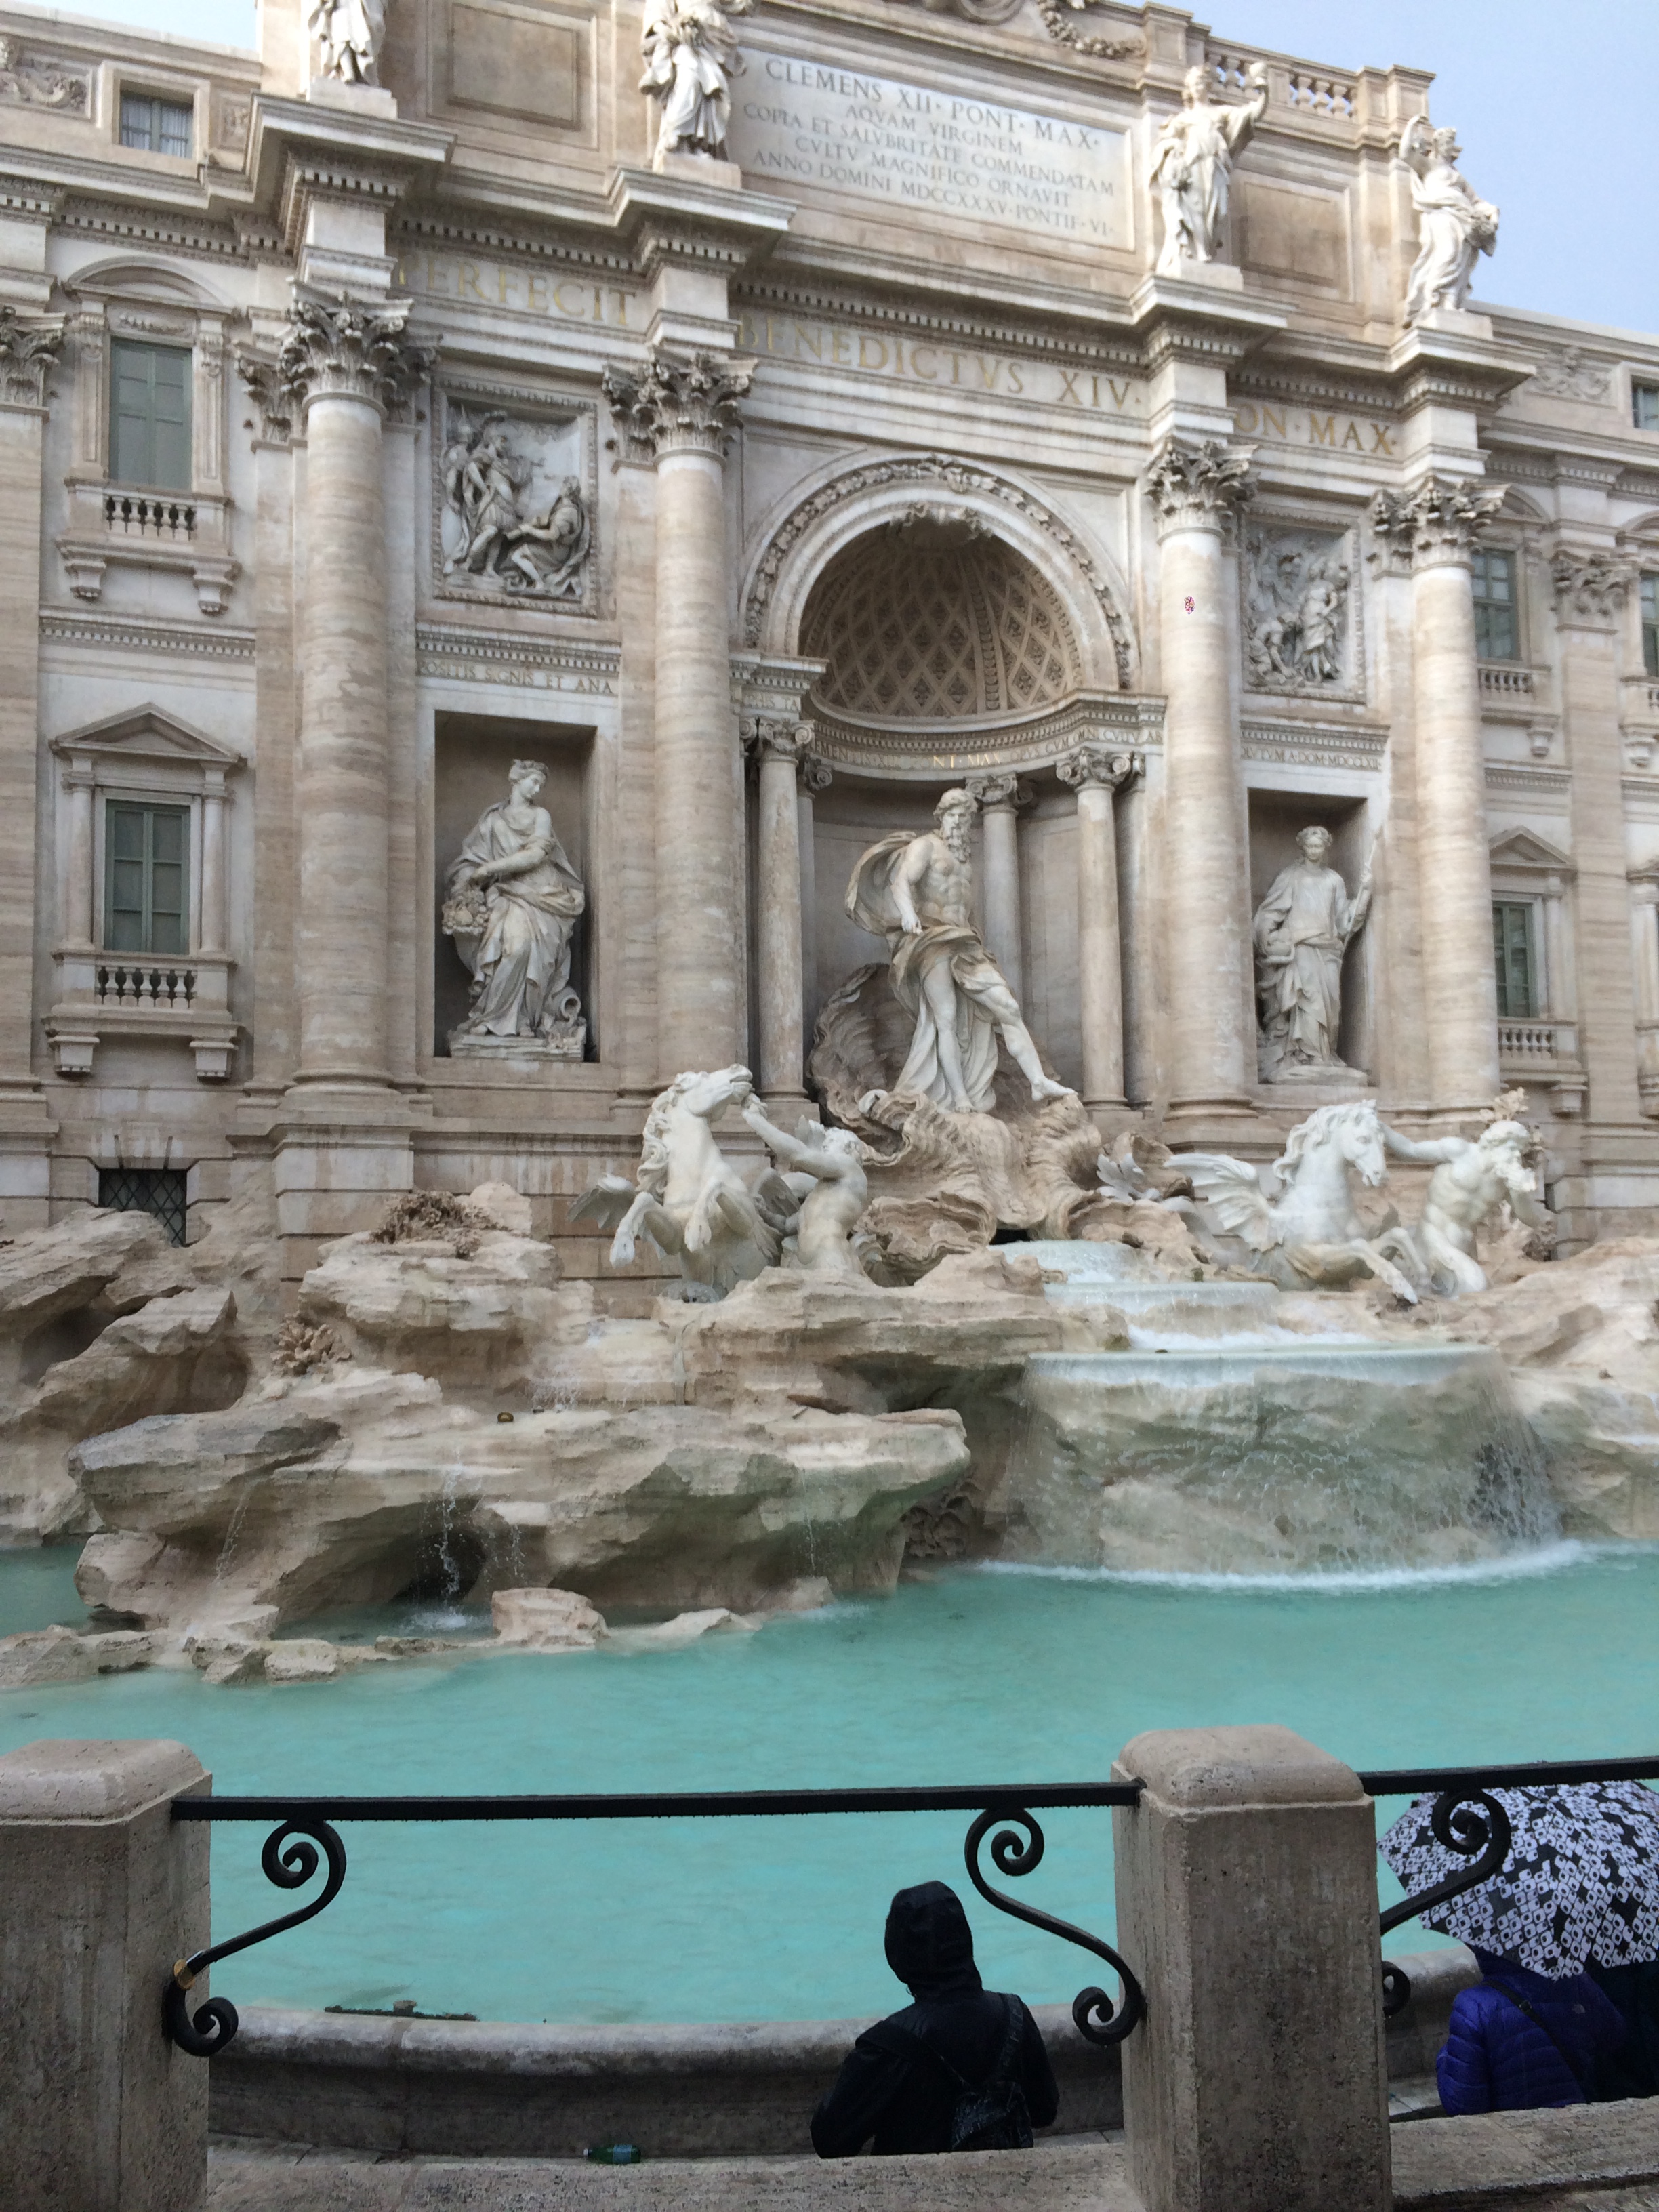 Image of the Trevi Fountain